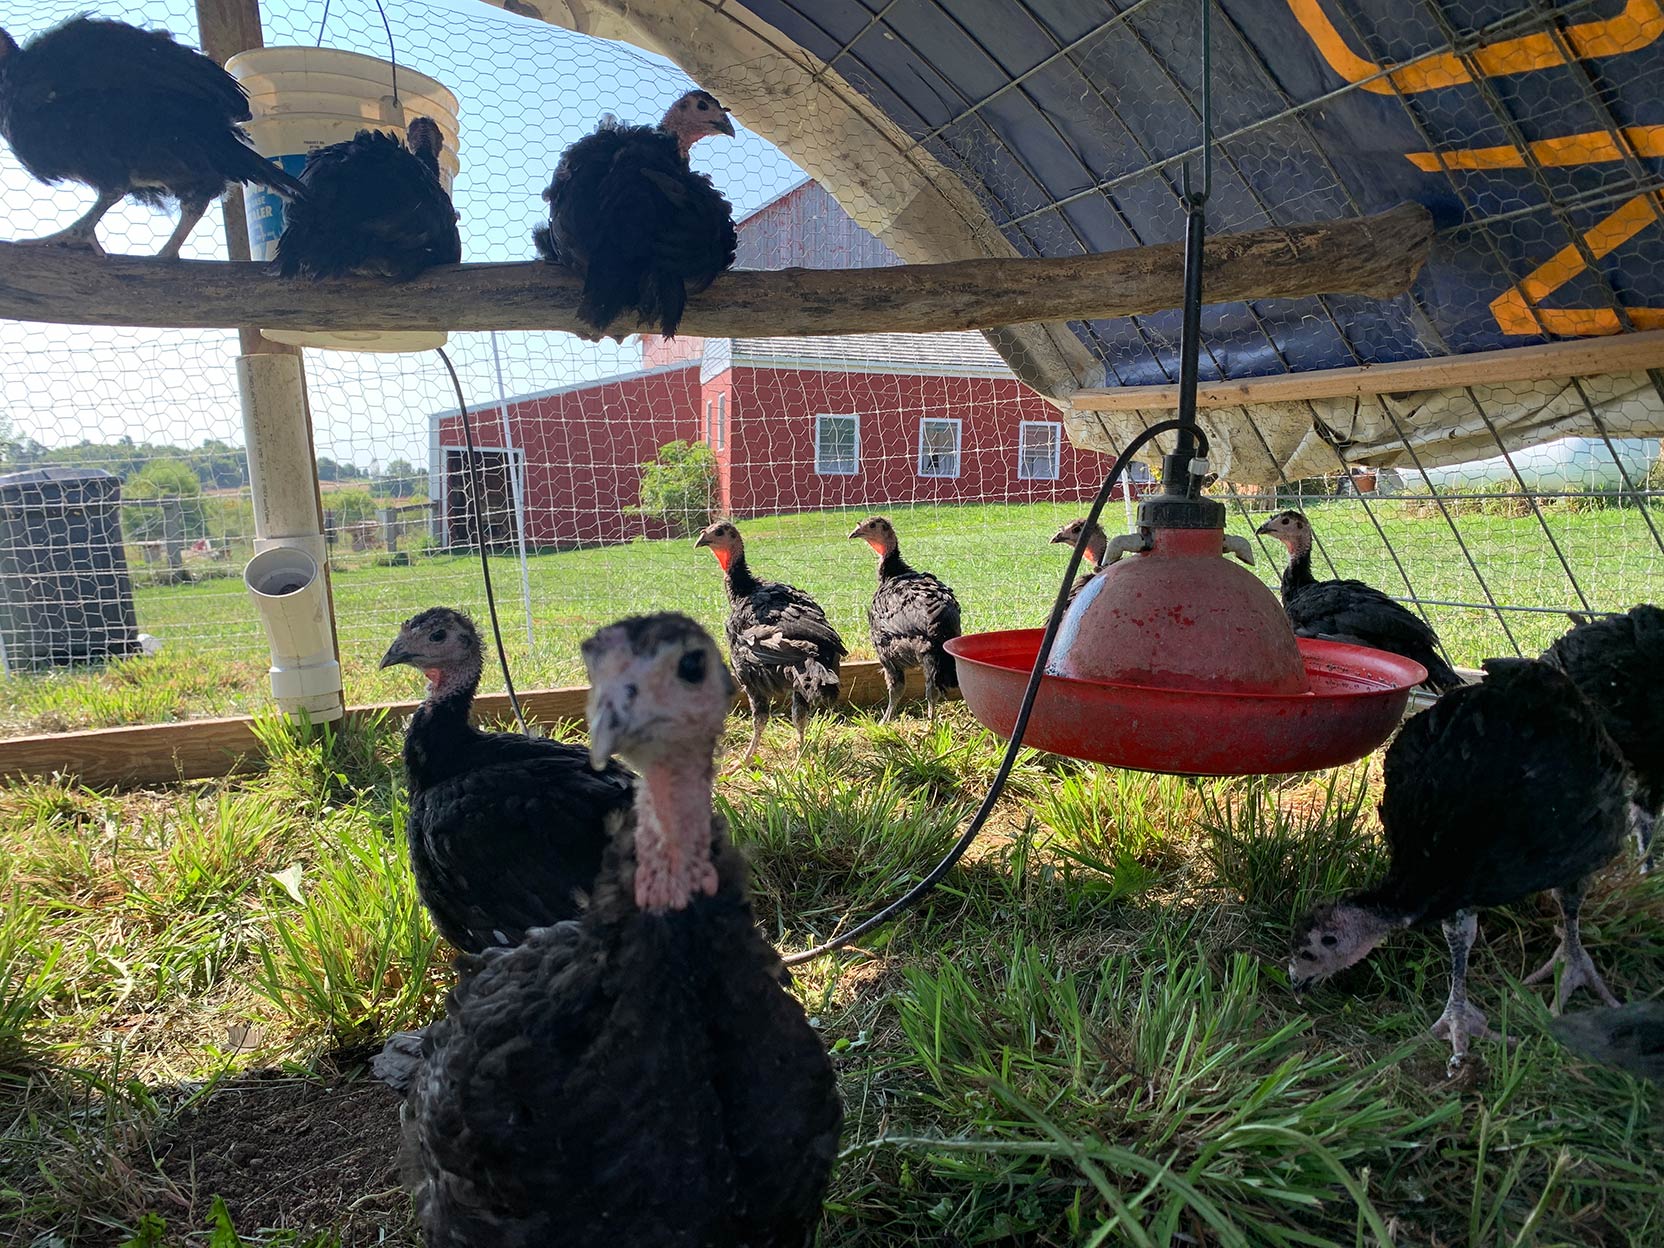 A group of young turkeys in a coop